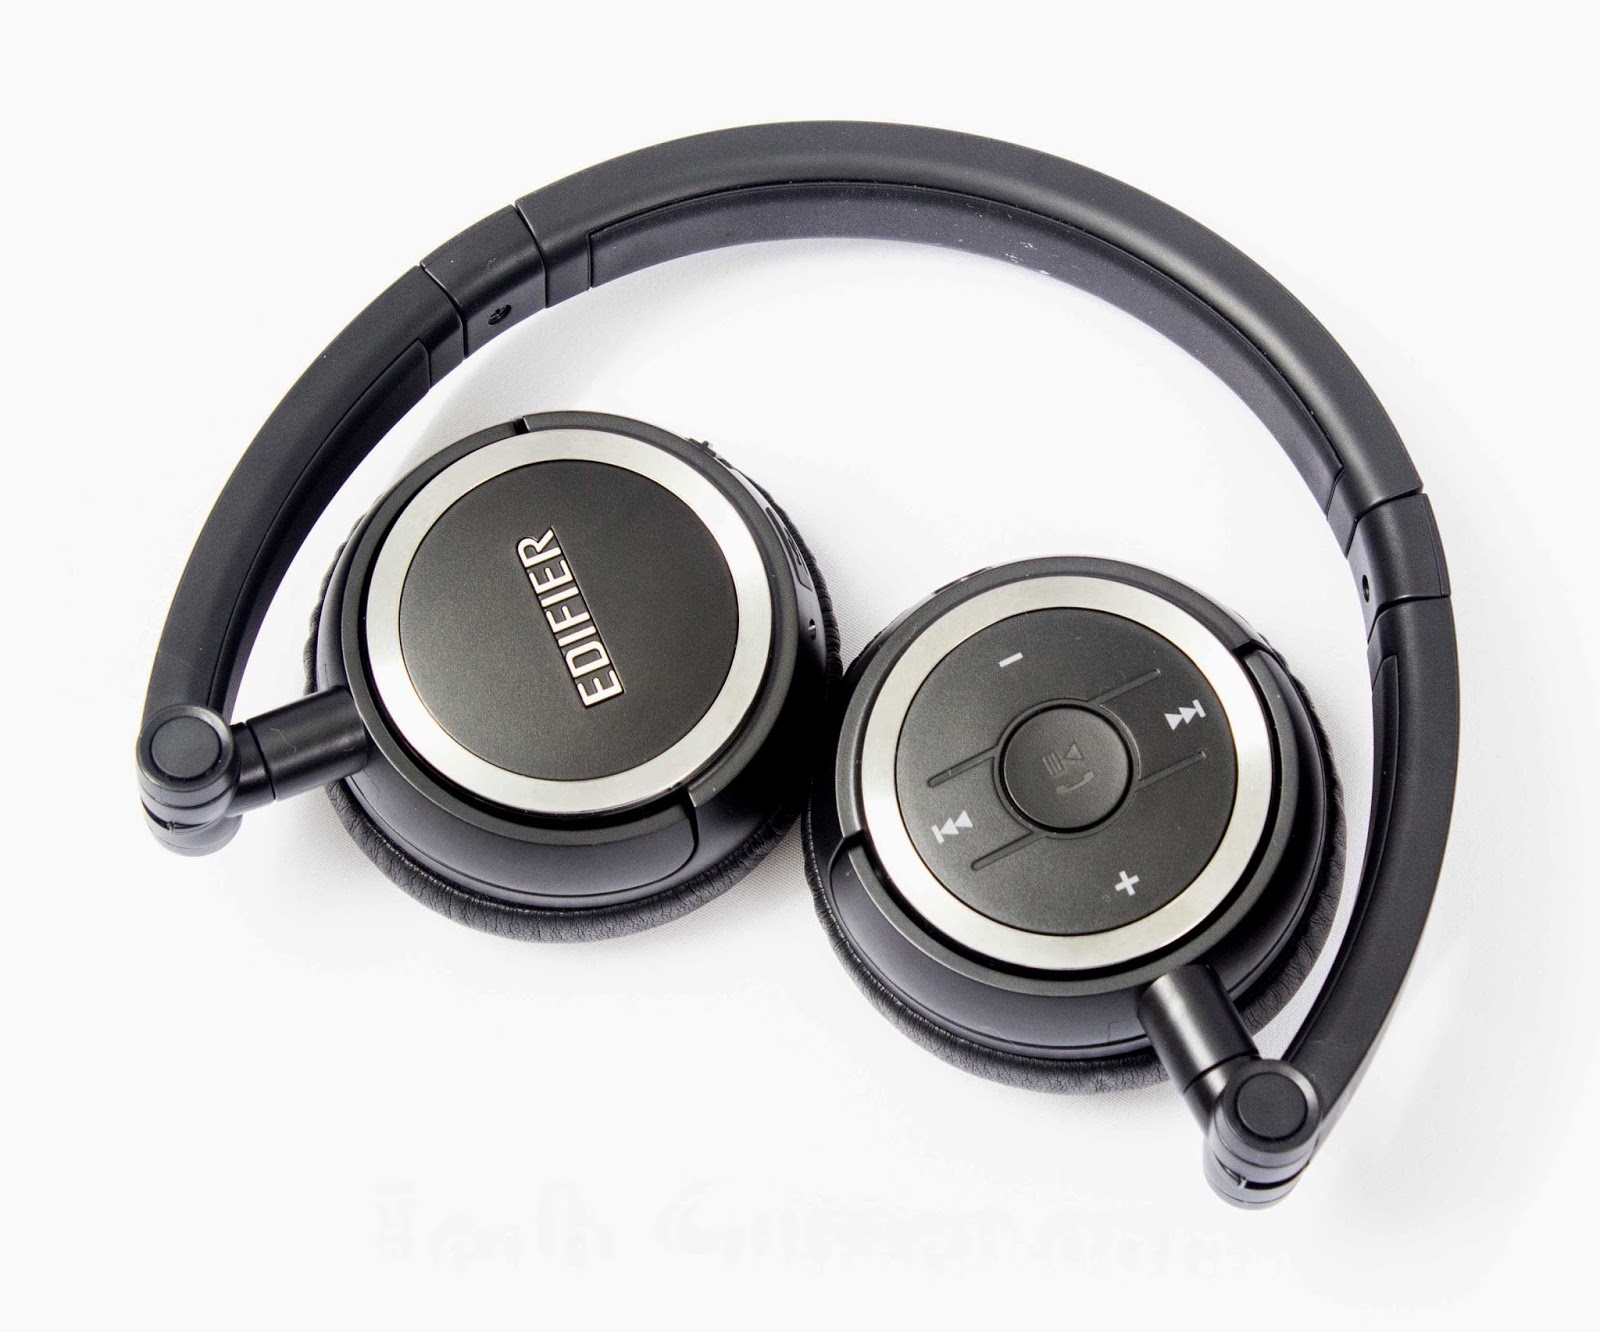 Unboxing & Review: Edifier W670BT Stereo Bluetooth Headset 41